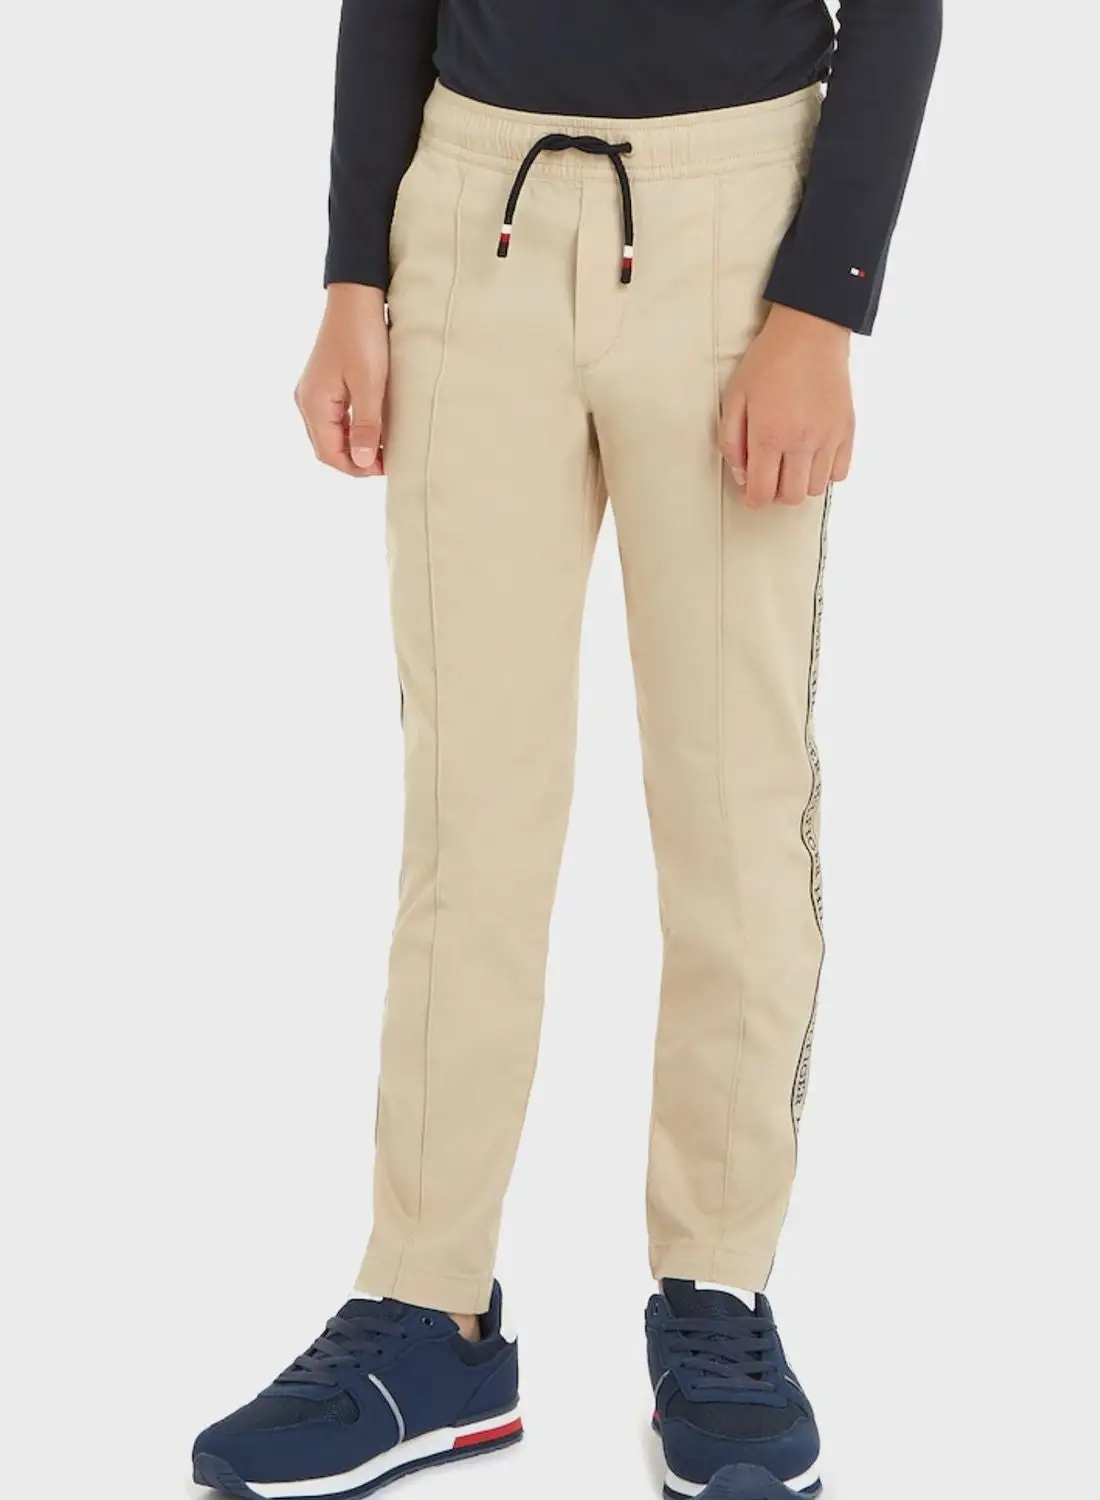 TOMMY HILFIGER Youth Draw String Essential Pants